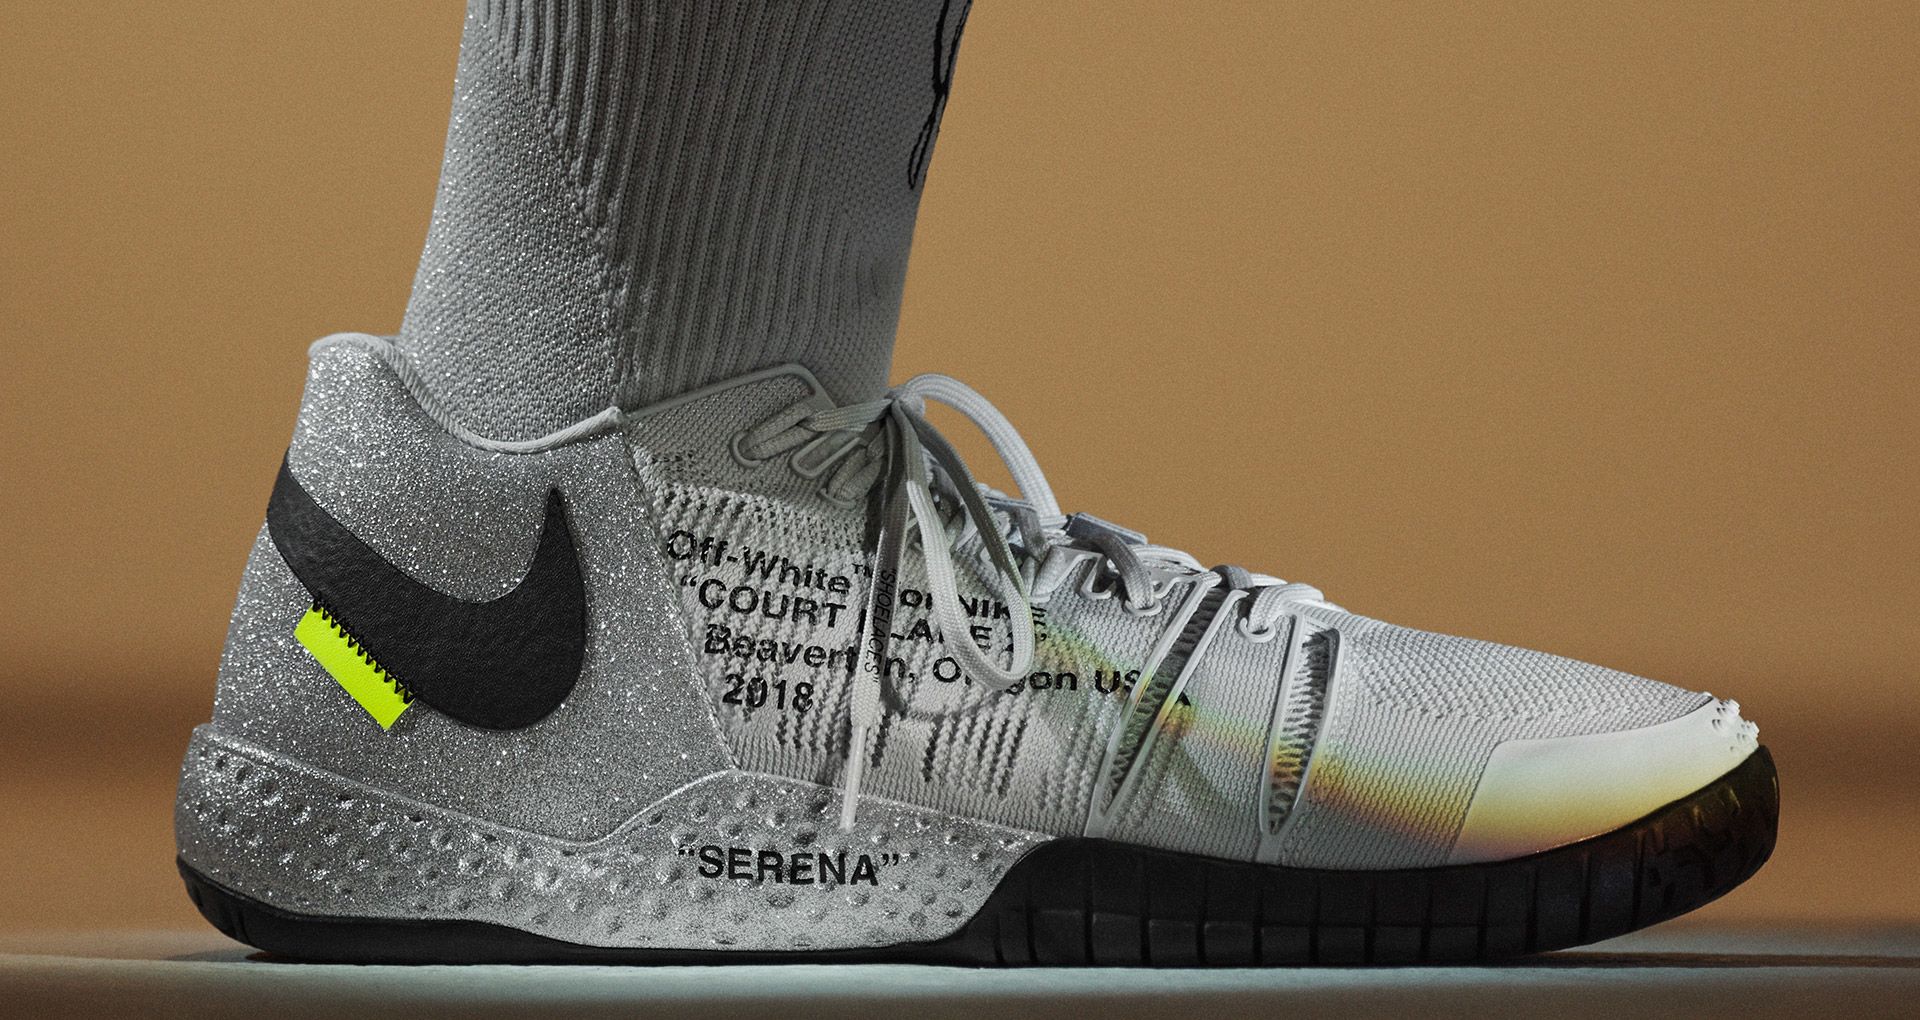 virgil abloh designed a nike collection for serena williams